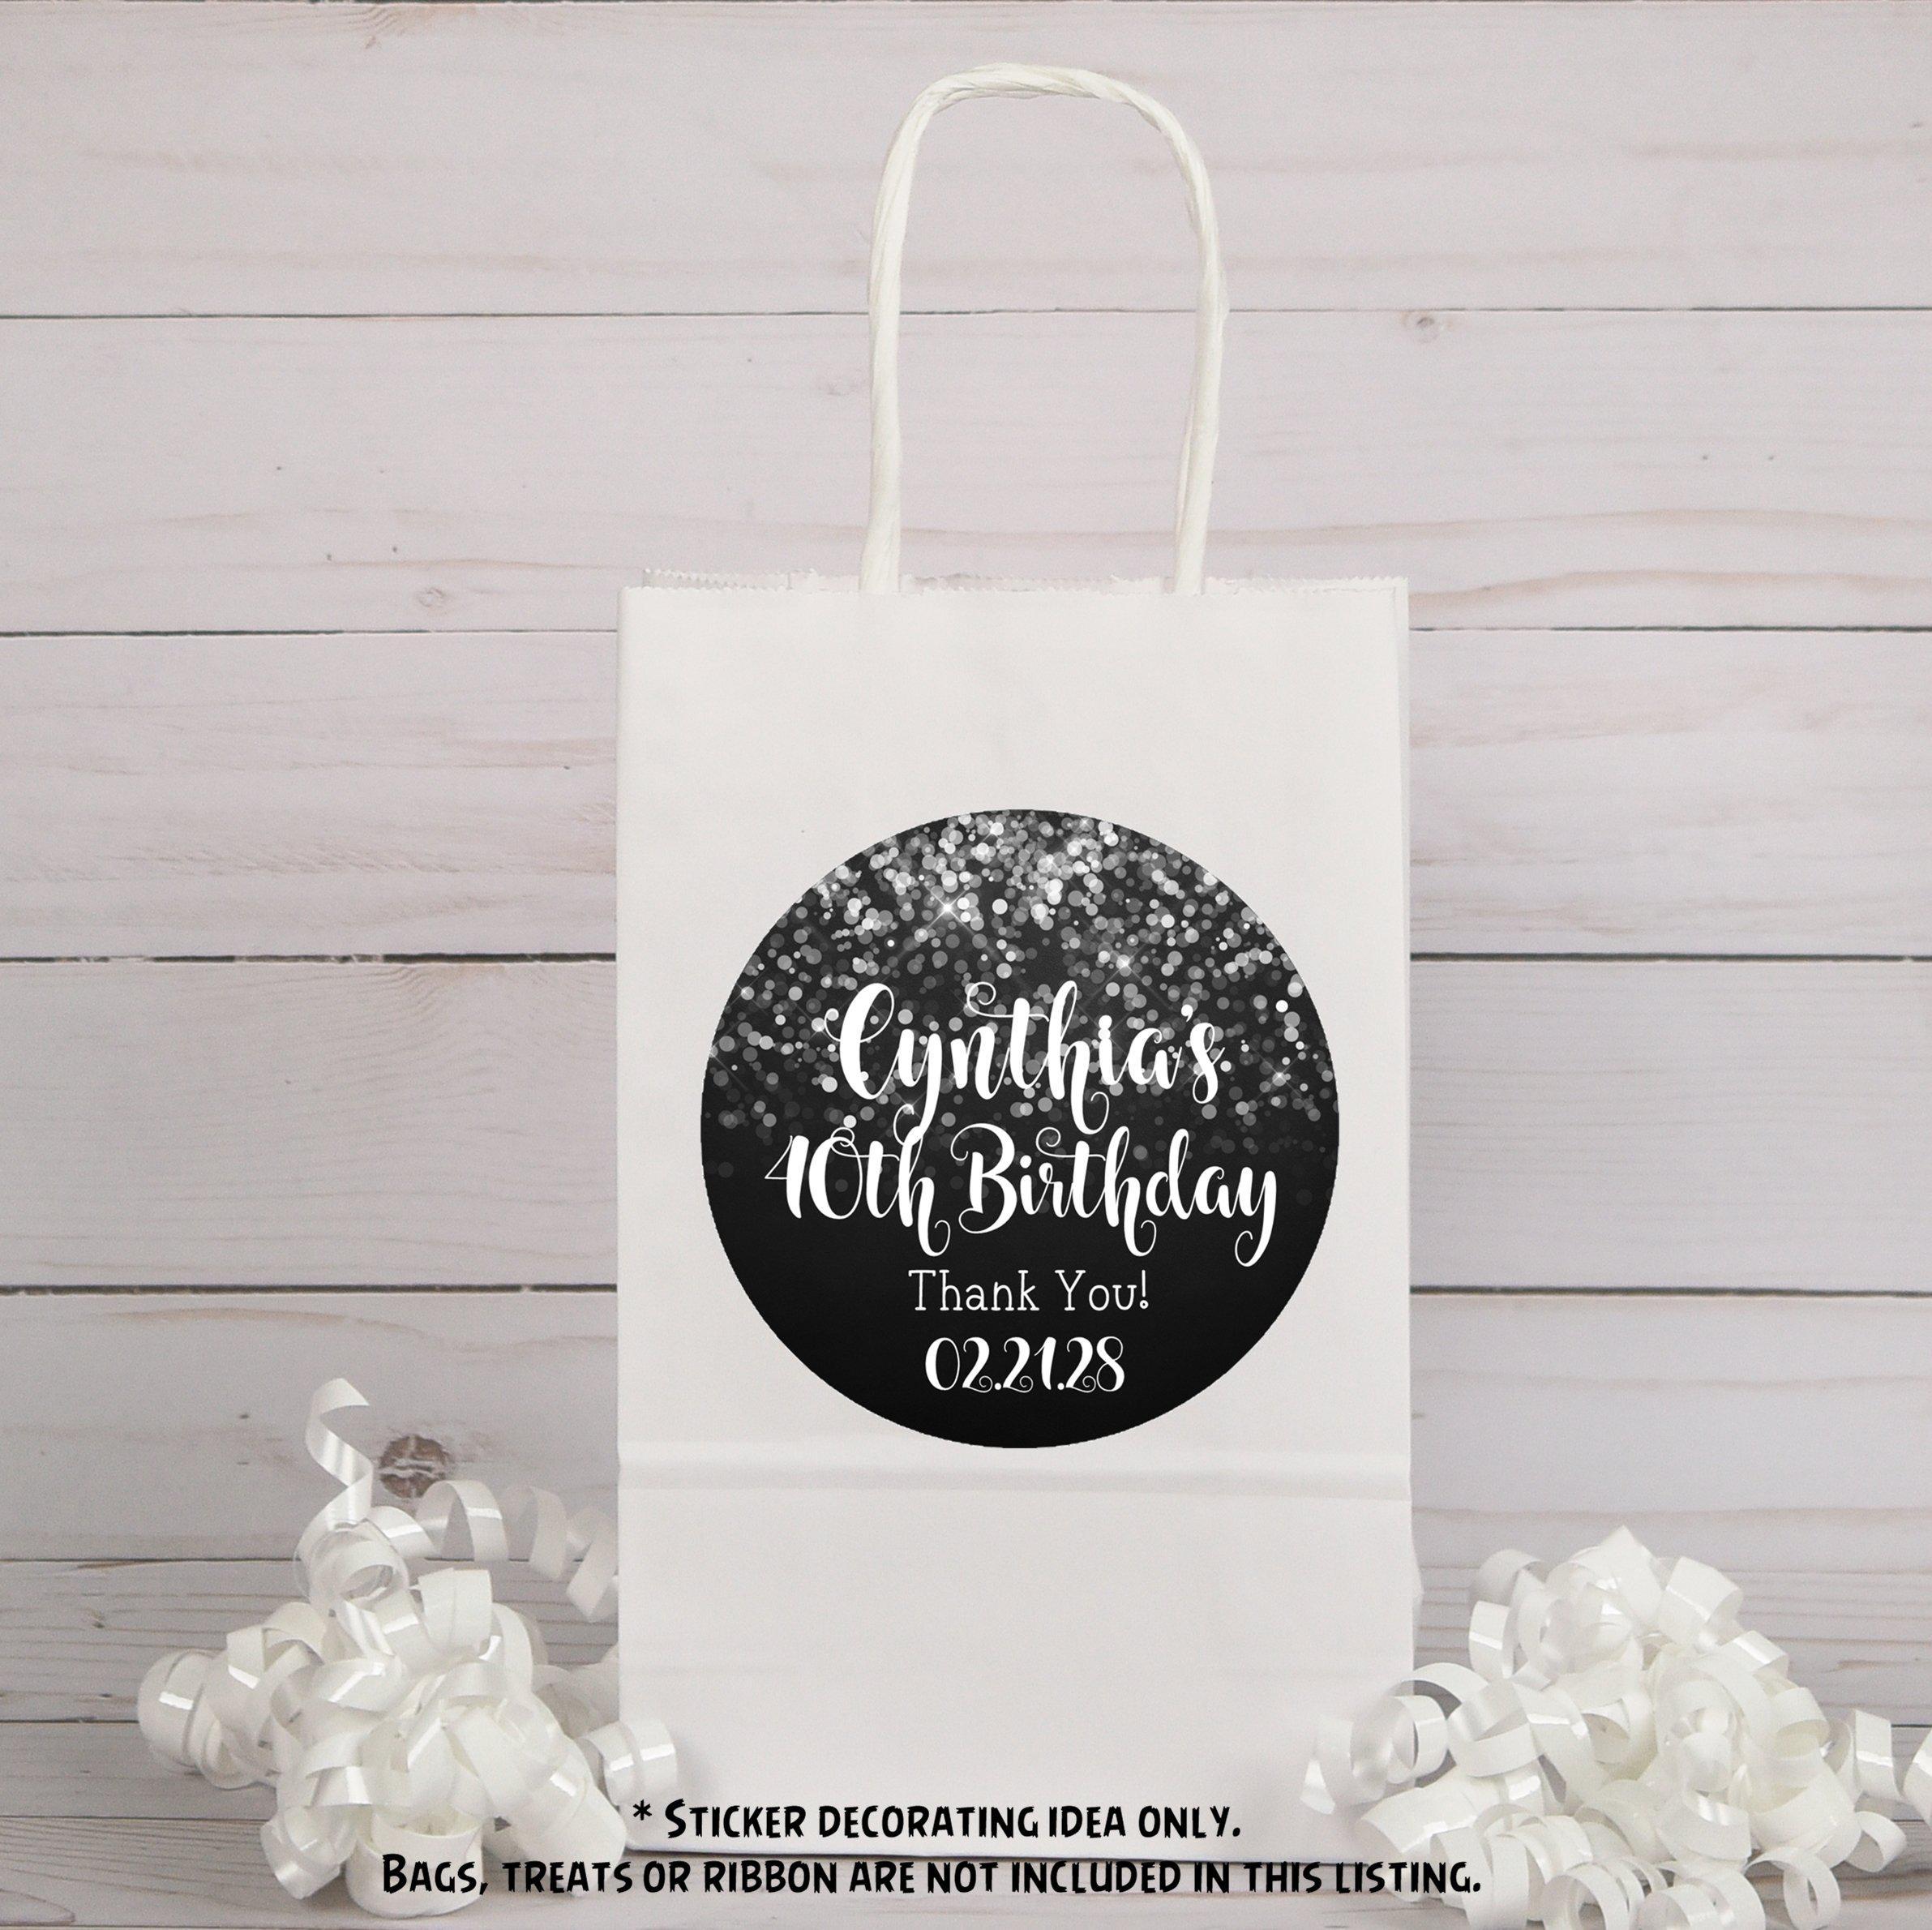 Black & White Birthday Party Stickers Or Favor Tags